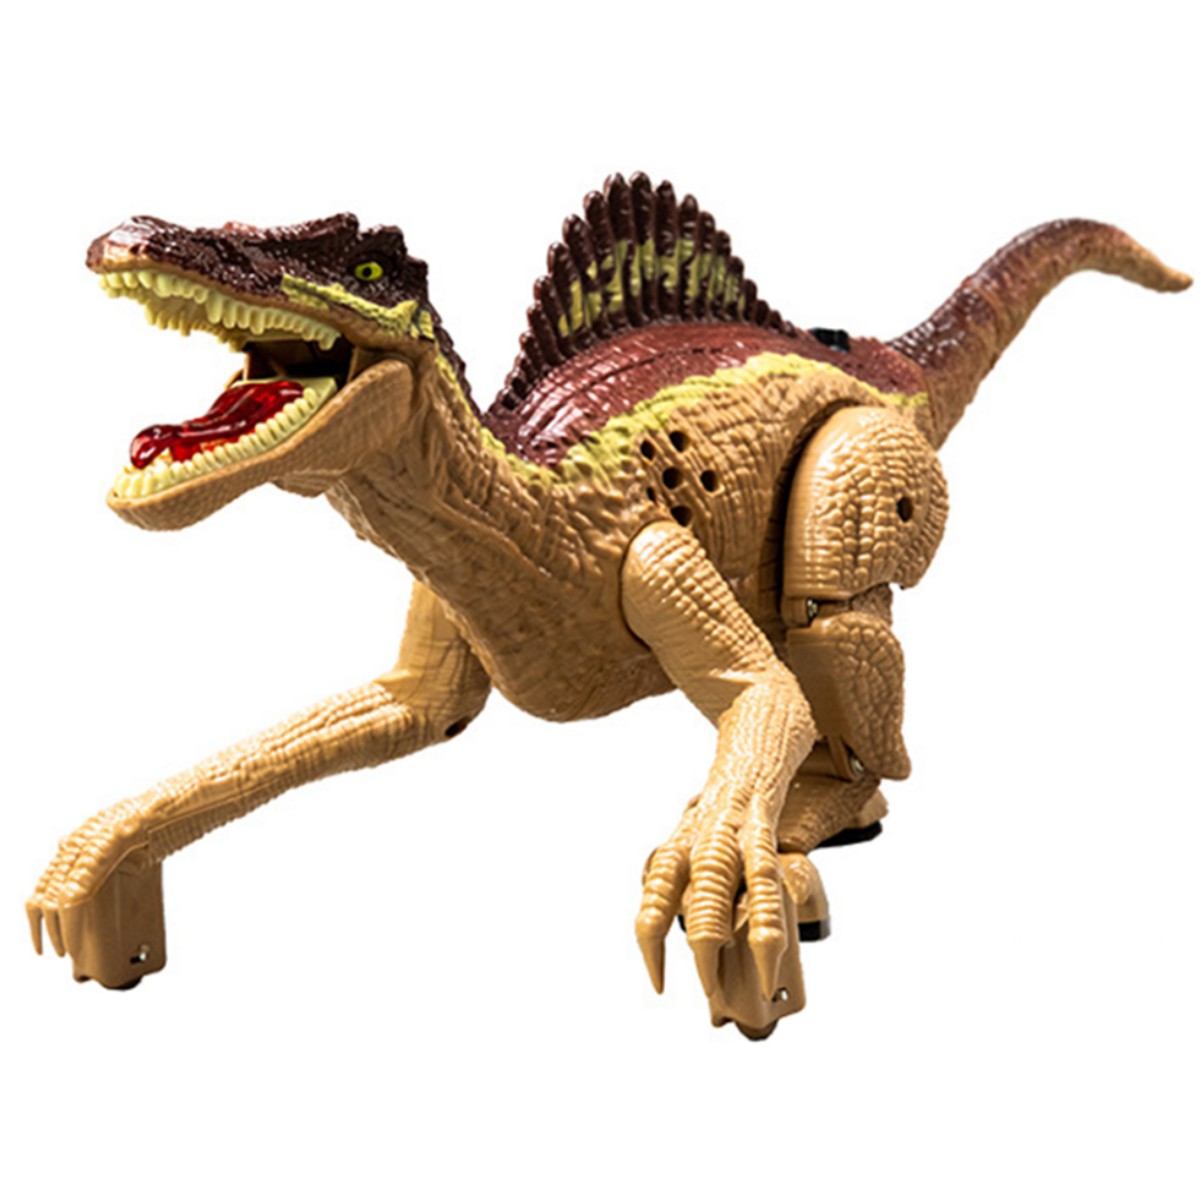 Remote Control Dinosaur Toys For Kids 2.4Ghz Realistic Jurassic Dinosaur RC Robot Toy With Light Sound Birthday Gifts For Boys Girls